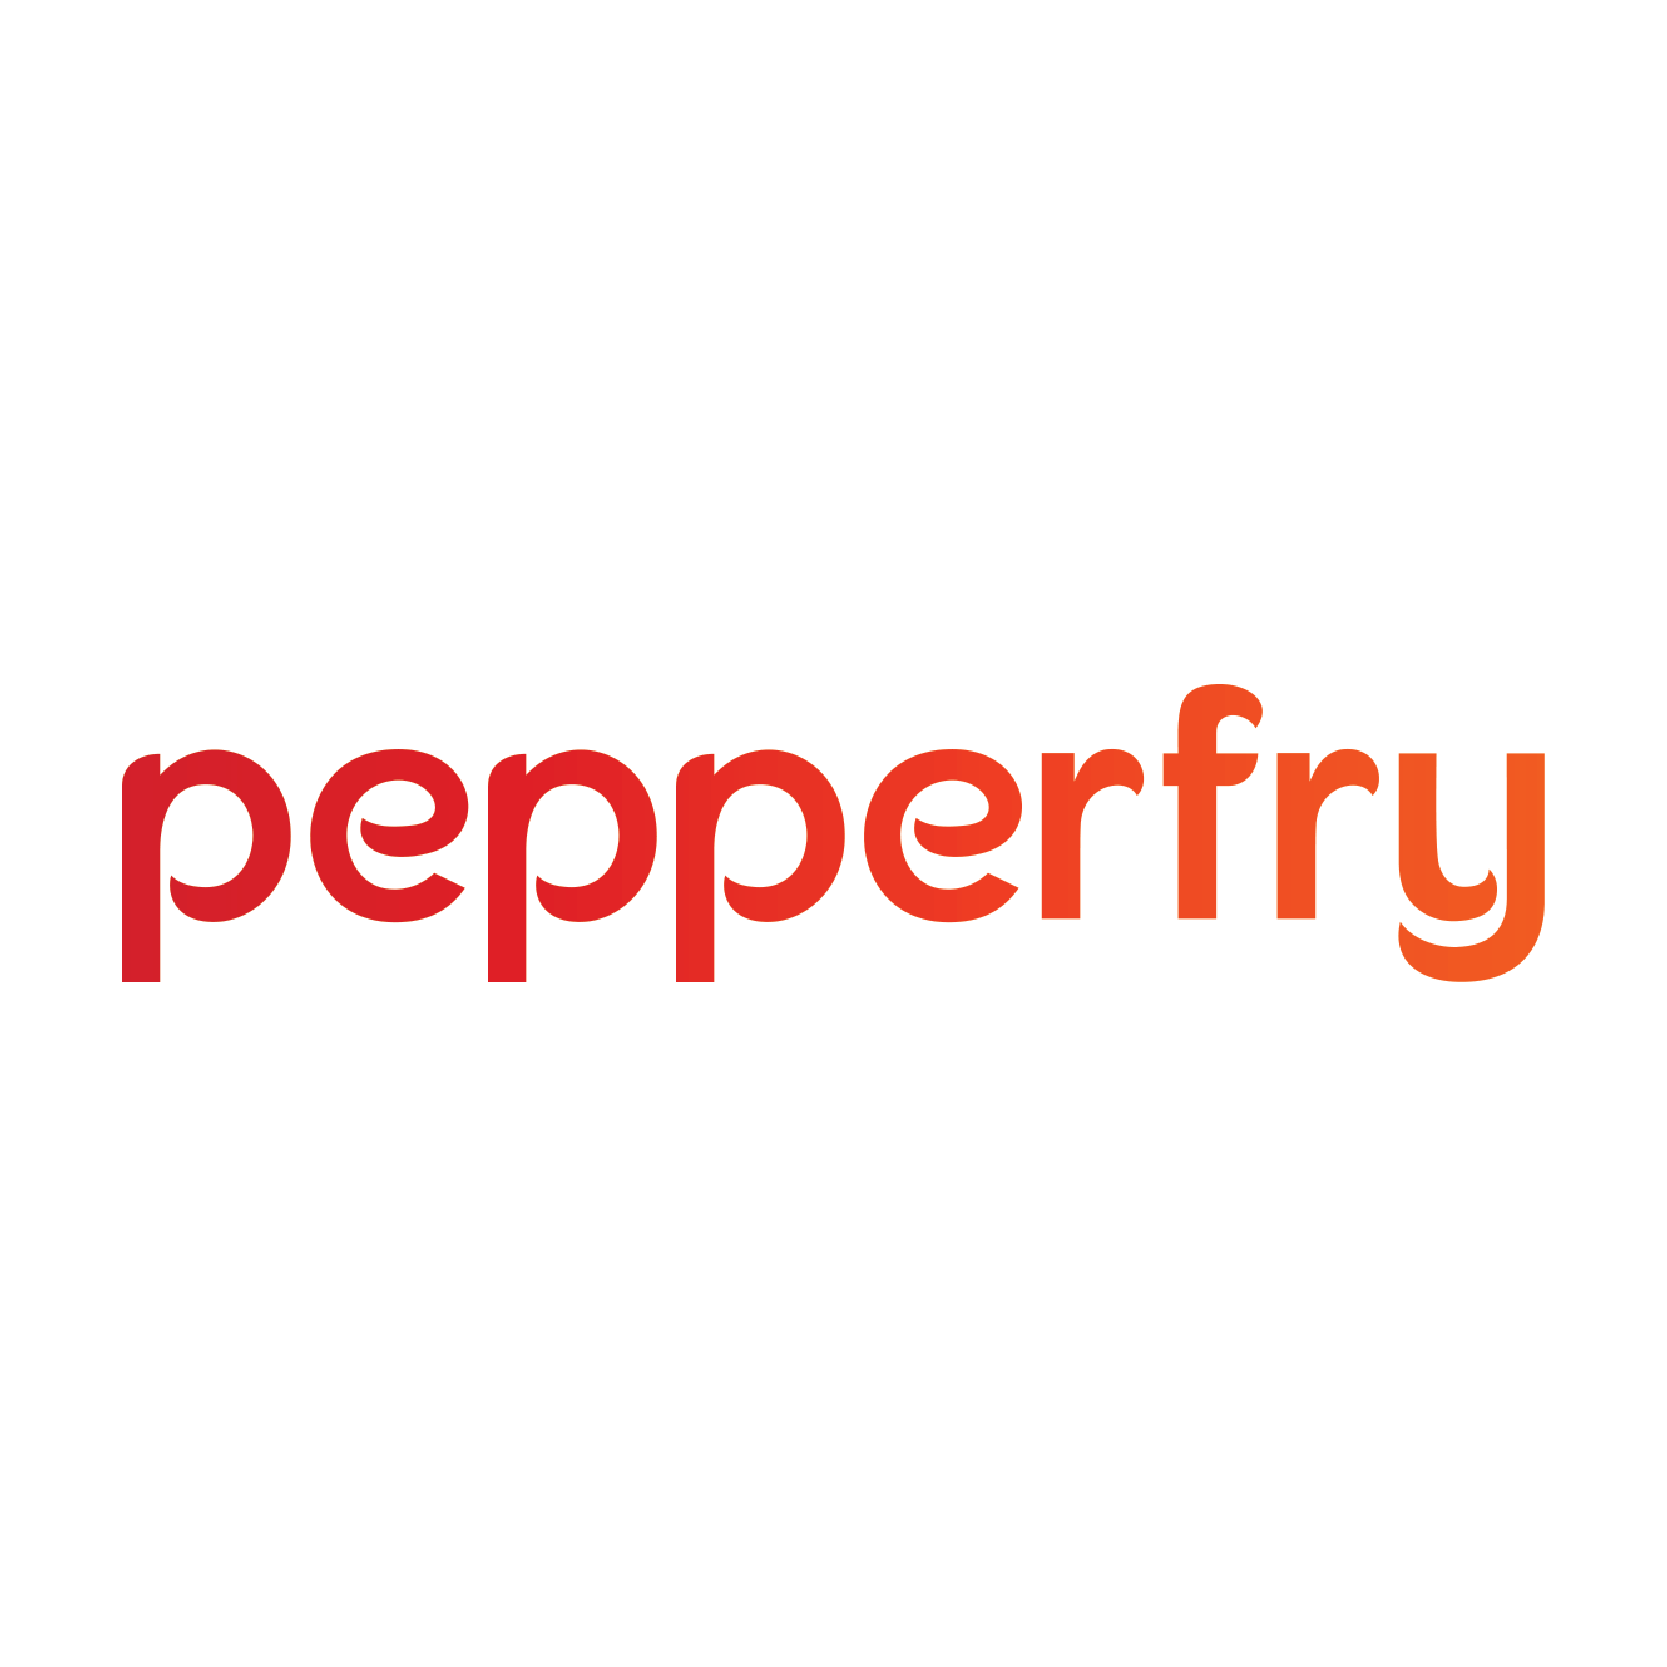 Pepperfry Coupons and Offers For Furniture Shopping